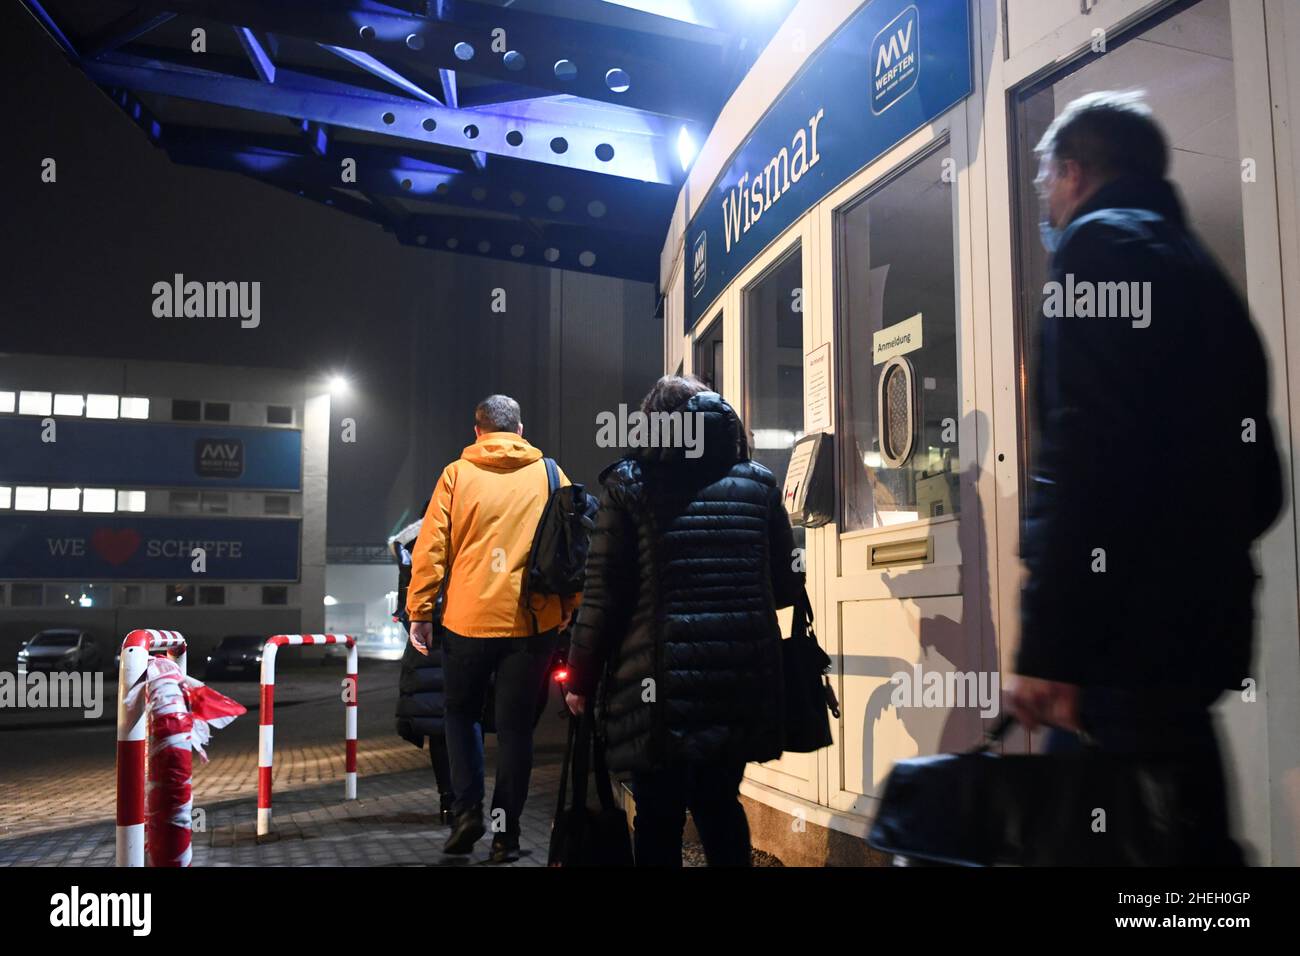 People pass by the entrance of the shipyard at the Wismar location of the MV-Werften shipyards which file insolvency, in Wismar, Germany January 11, 2022. REUTERS/Annegret Hilse Stock Photo